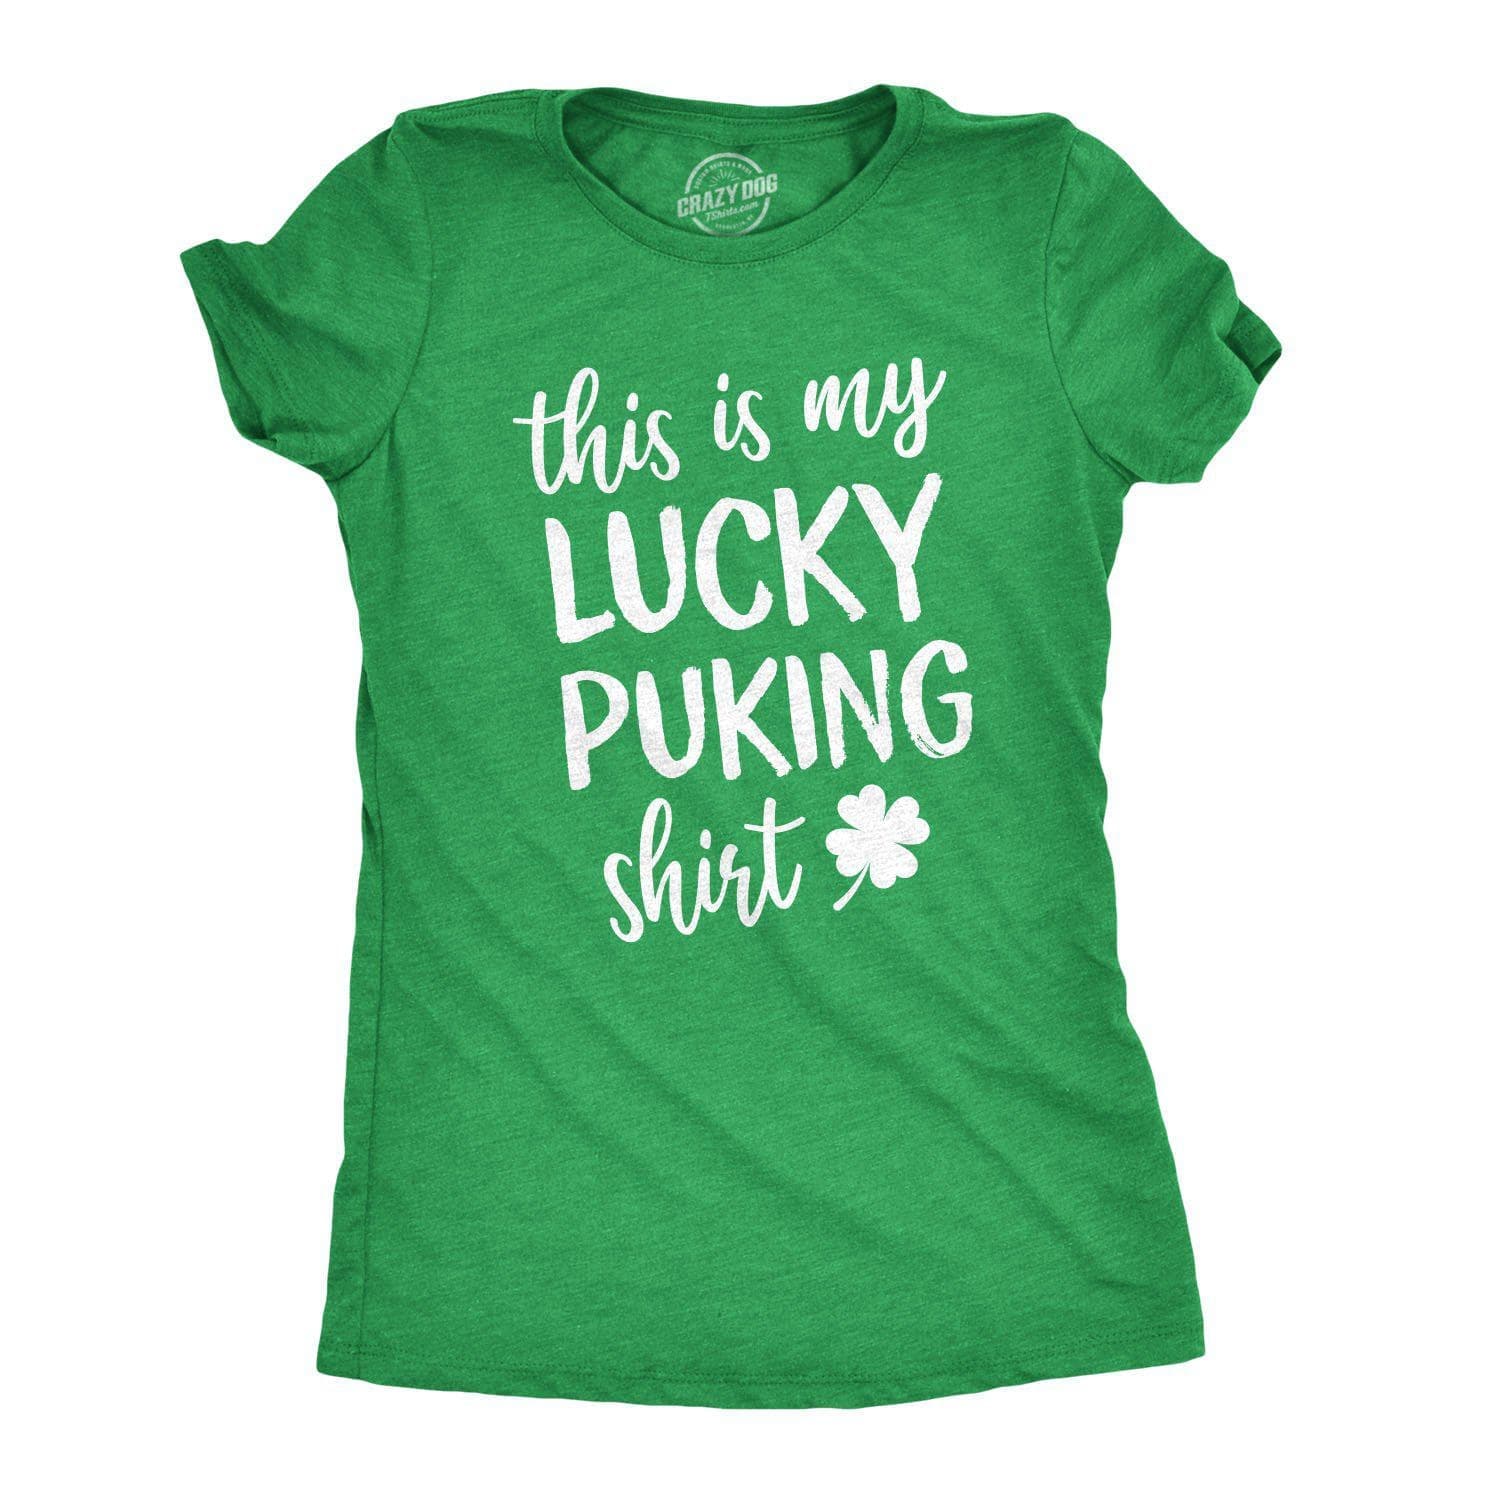 This Is My Lucky Puking Shirt Women's Tshirt - Crazy Dog T-Shirts